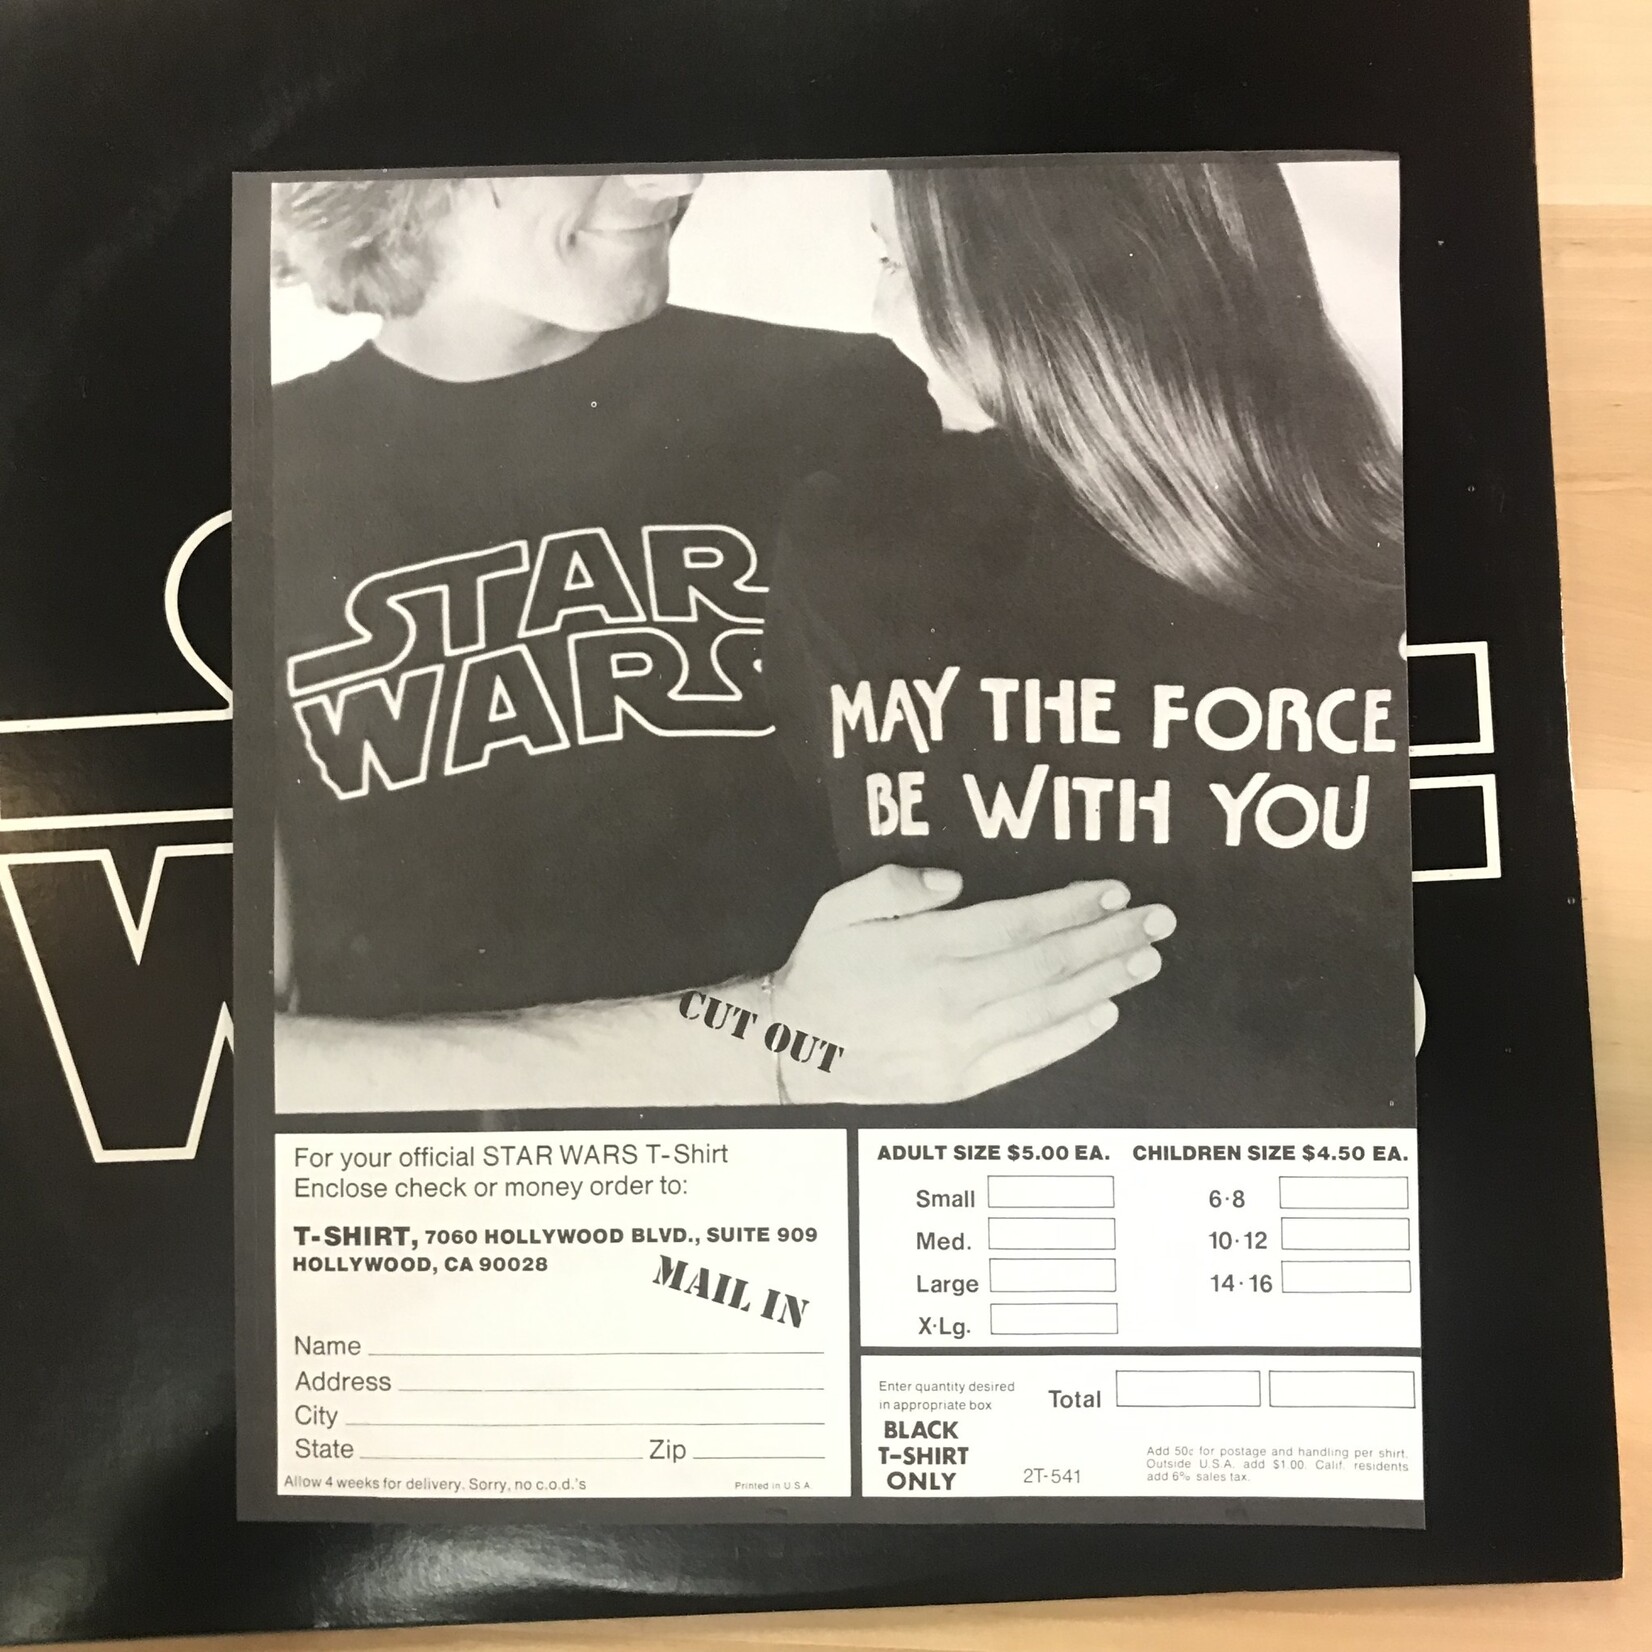 Star Wars - Original Soundtrack Composed And Conducted By John Williams - 2T 541 - Vinyl LP w/ Poster (USED)